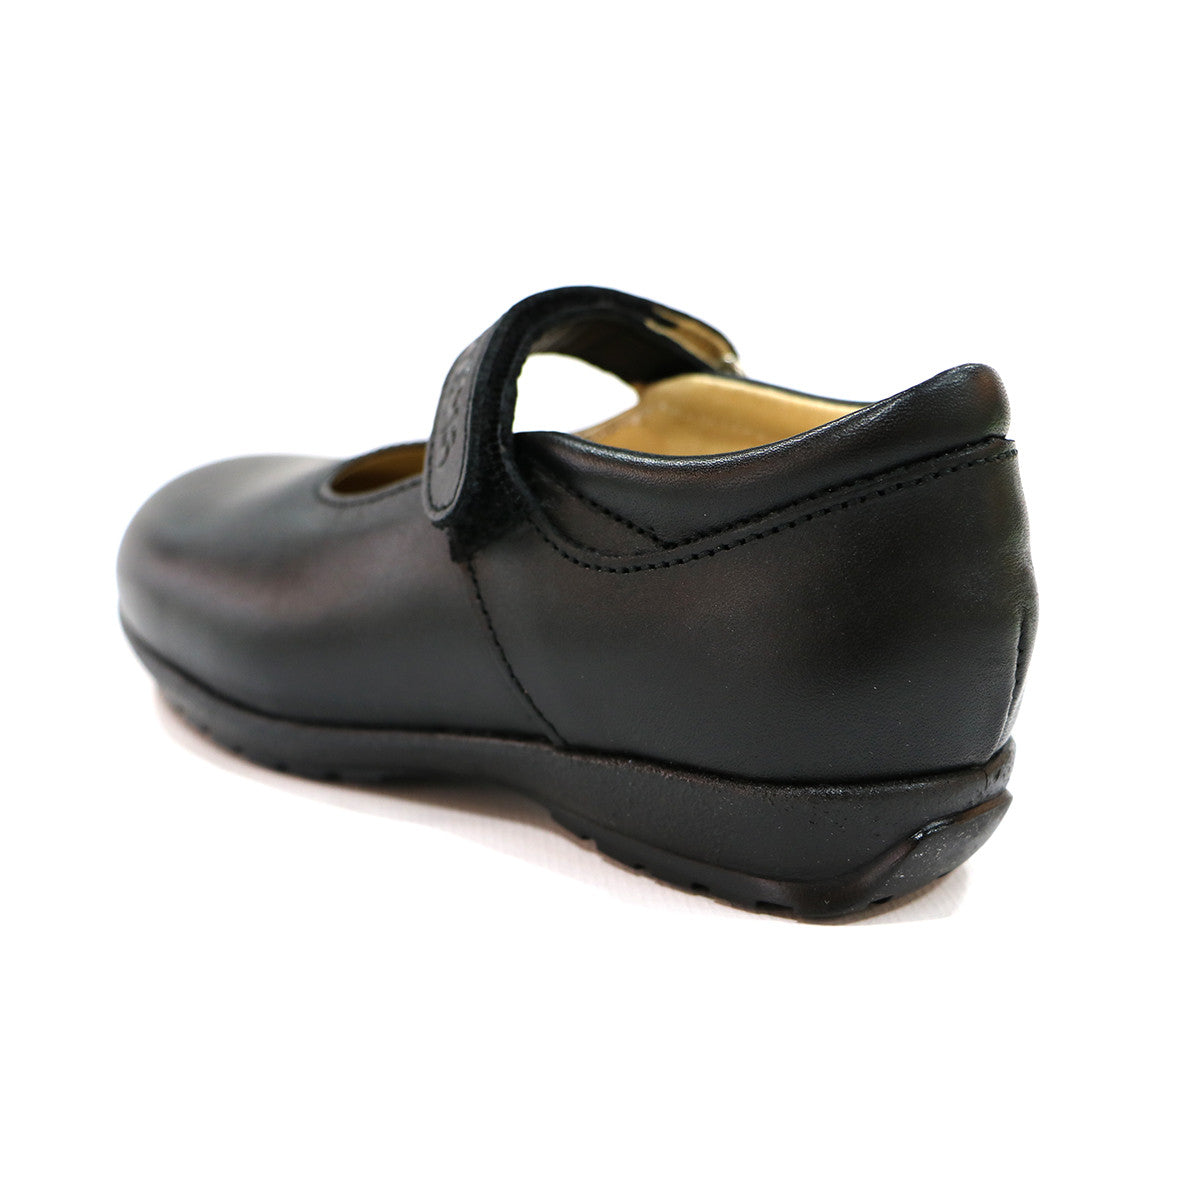 school shoes for girls – Simply Shoes 